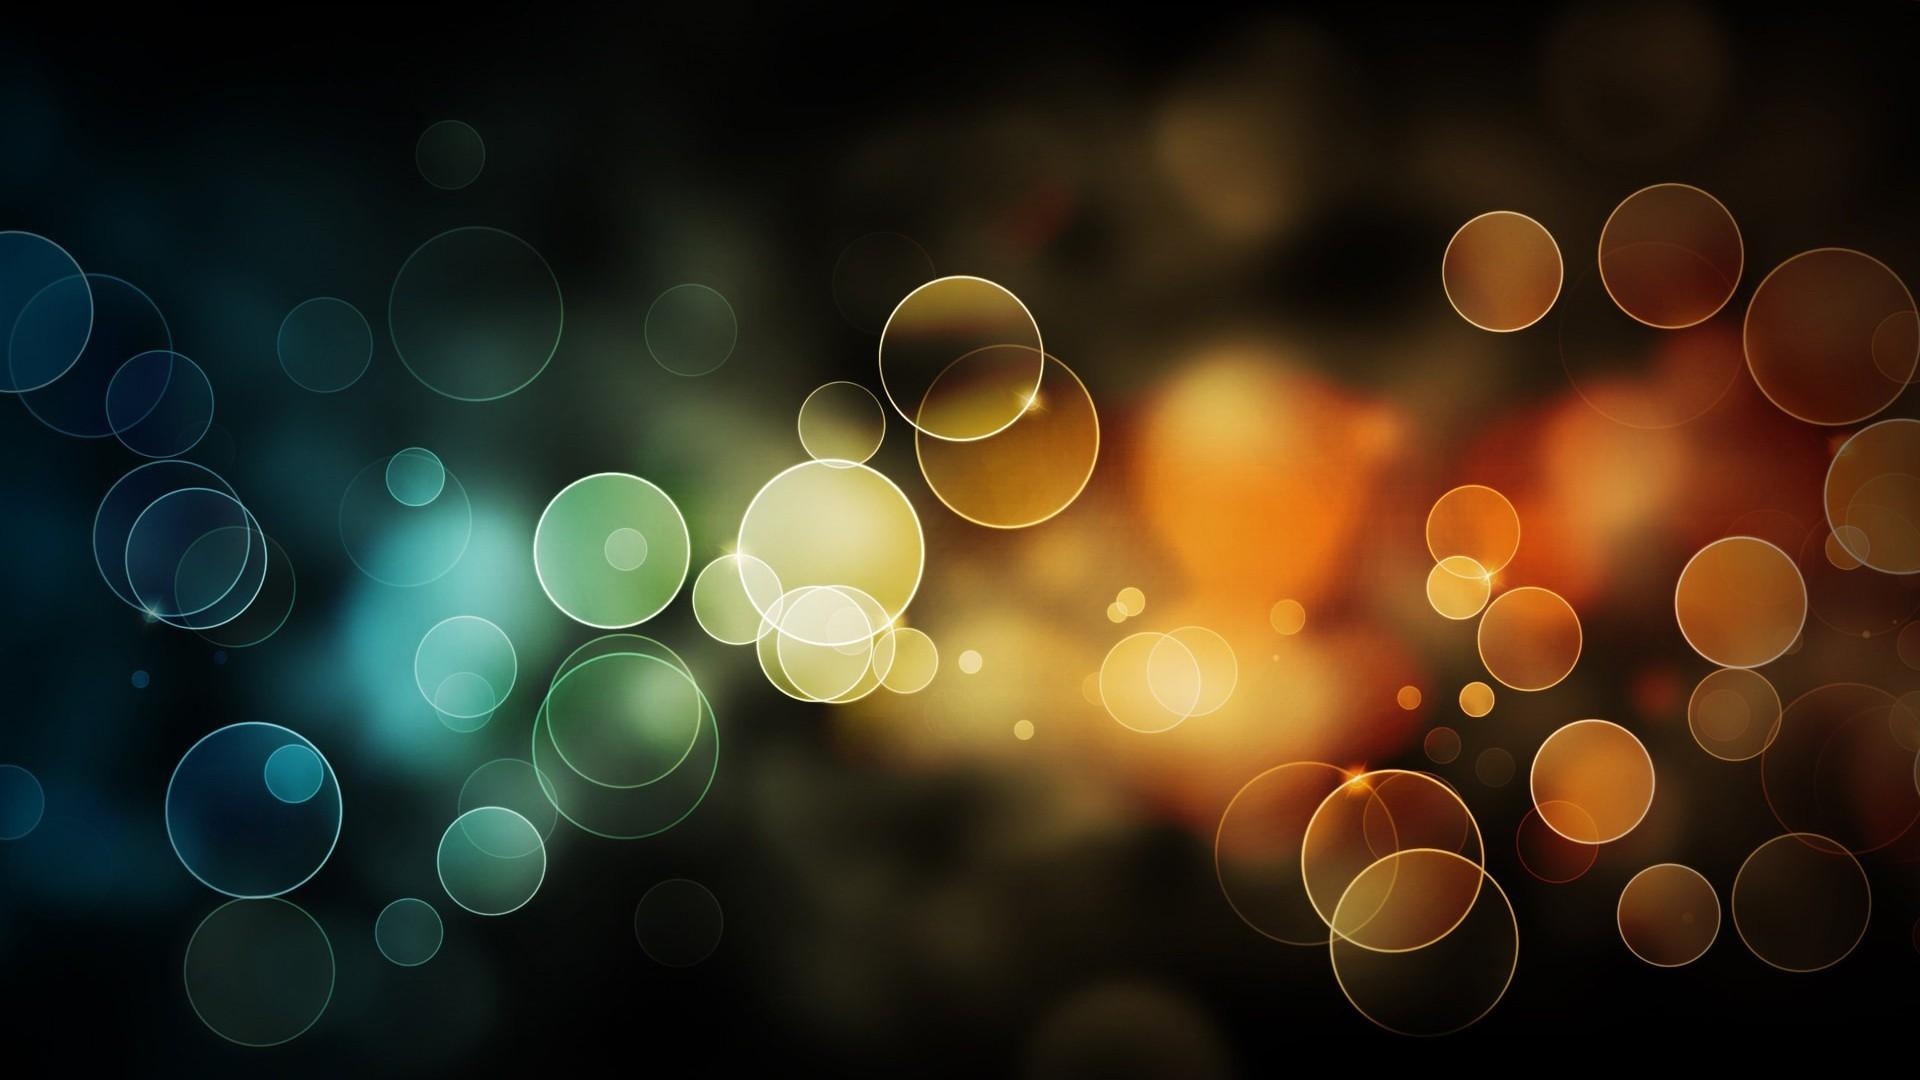 Abstract bubble background wallpaper | (134722)